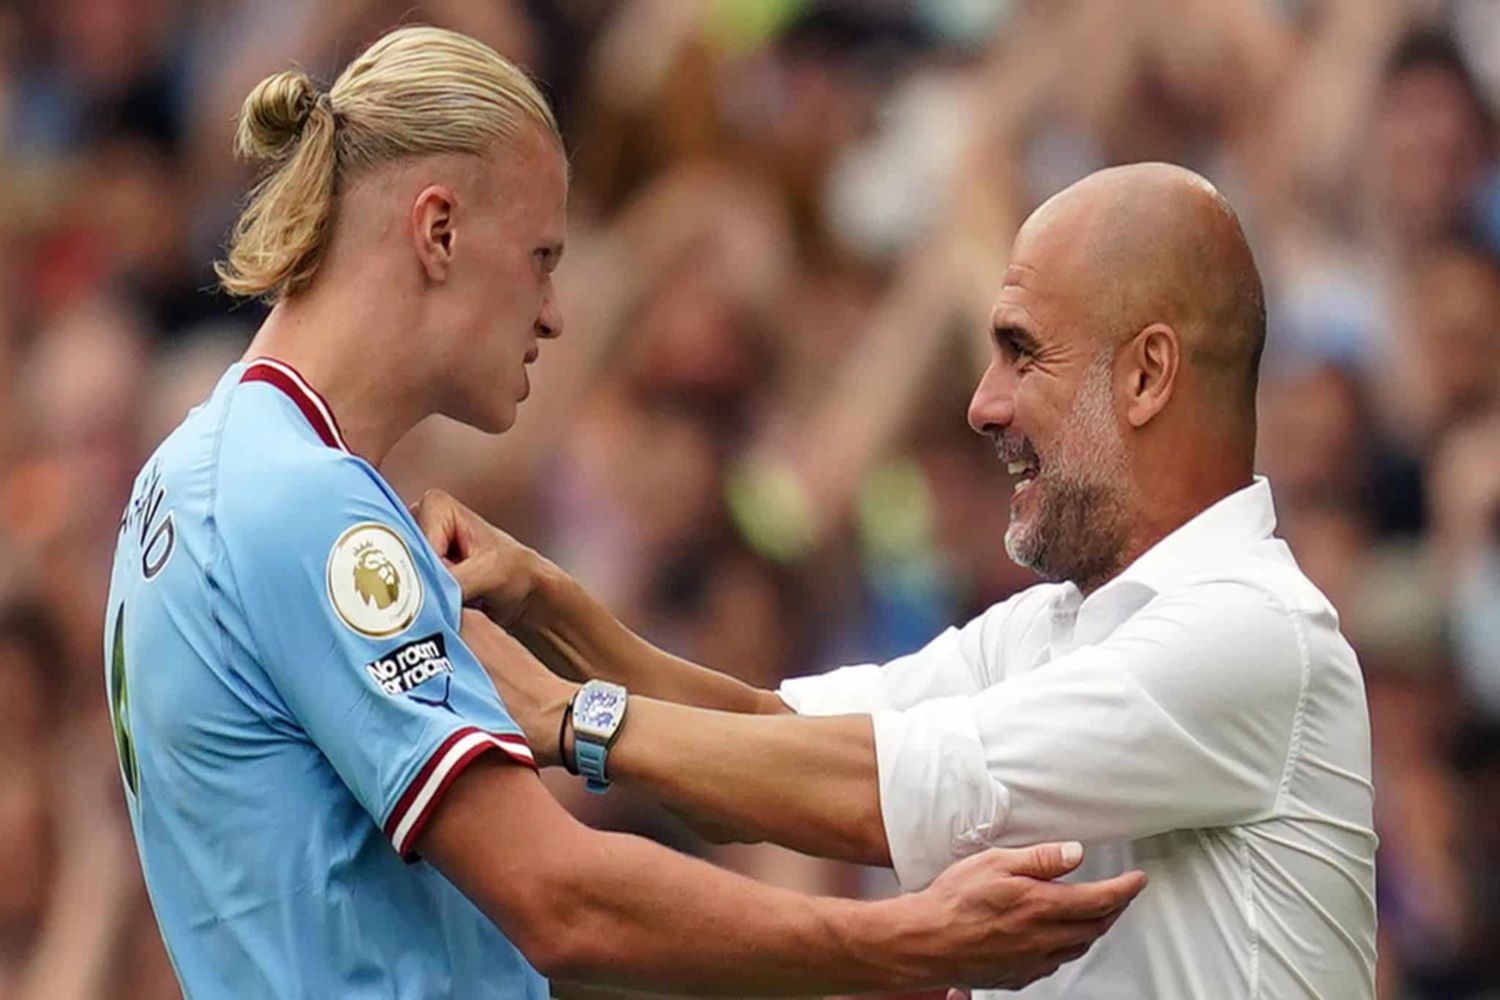 Guardiola stands by Haaland, a united front against criticism.